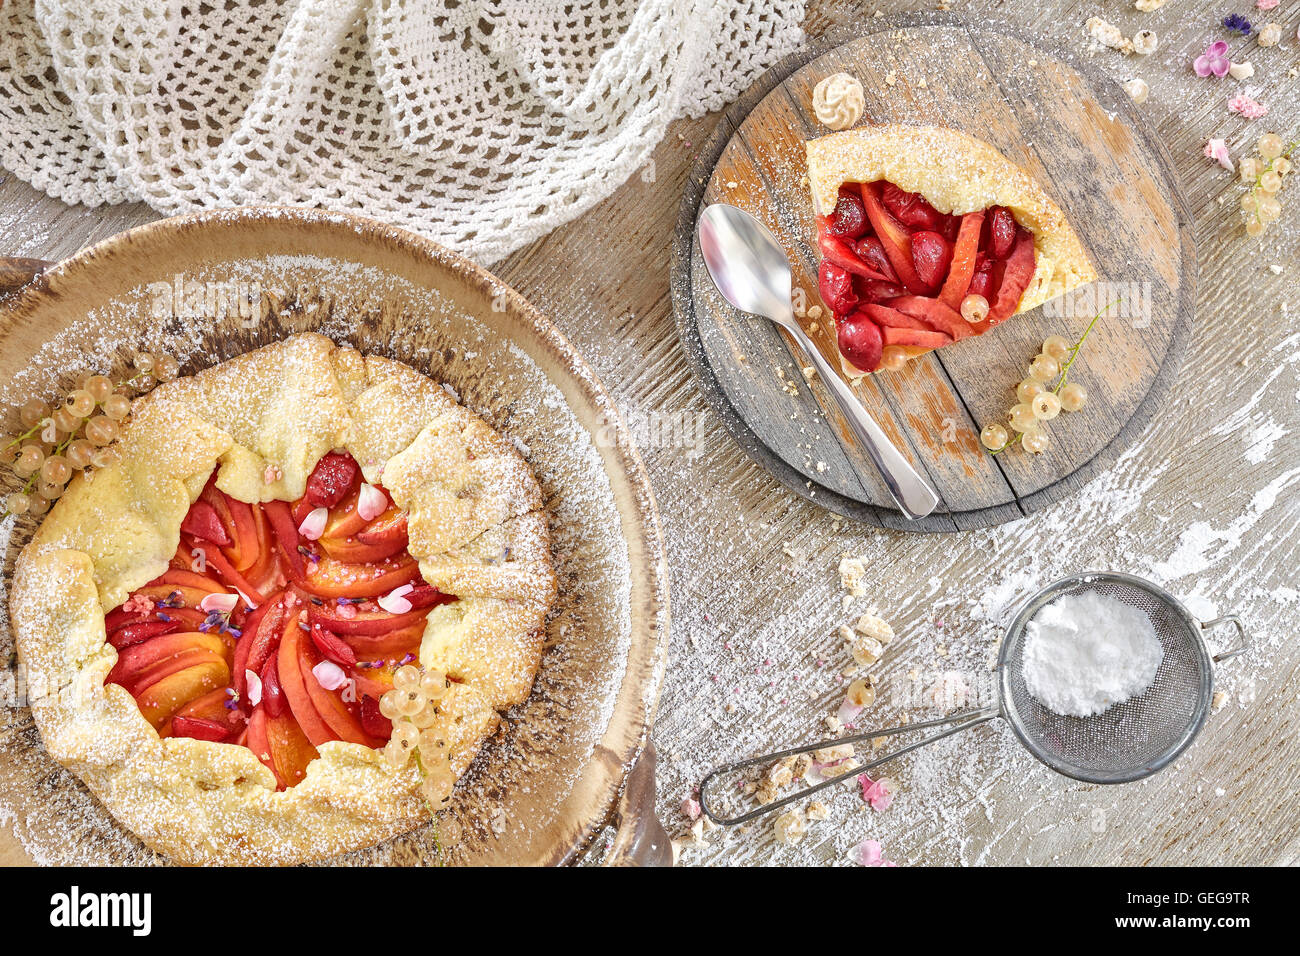 Top view of rustic fruit tarts on a wooden table, homemade pastry. Stock Photo